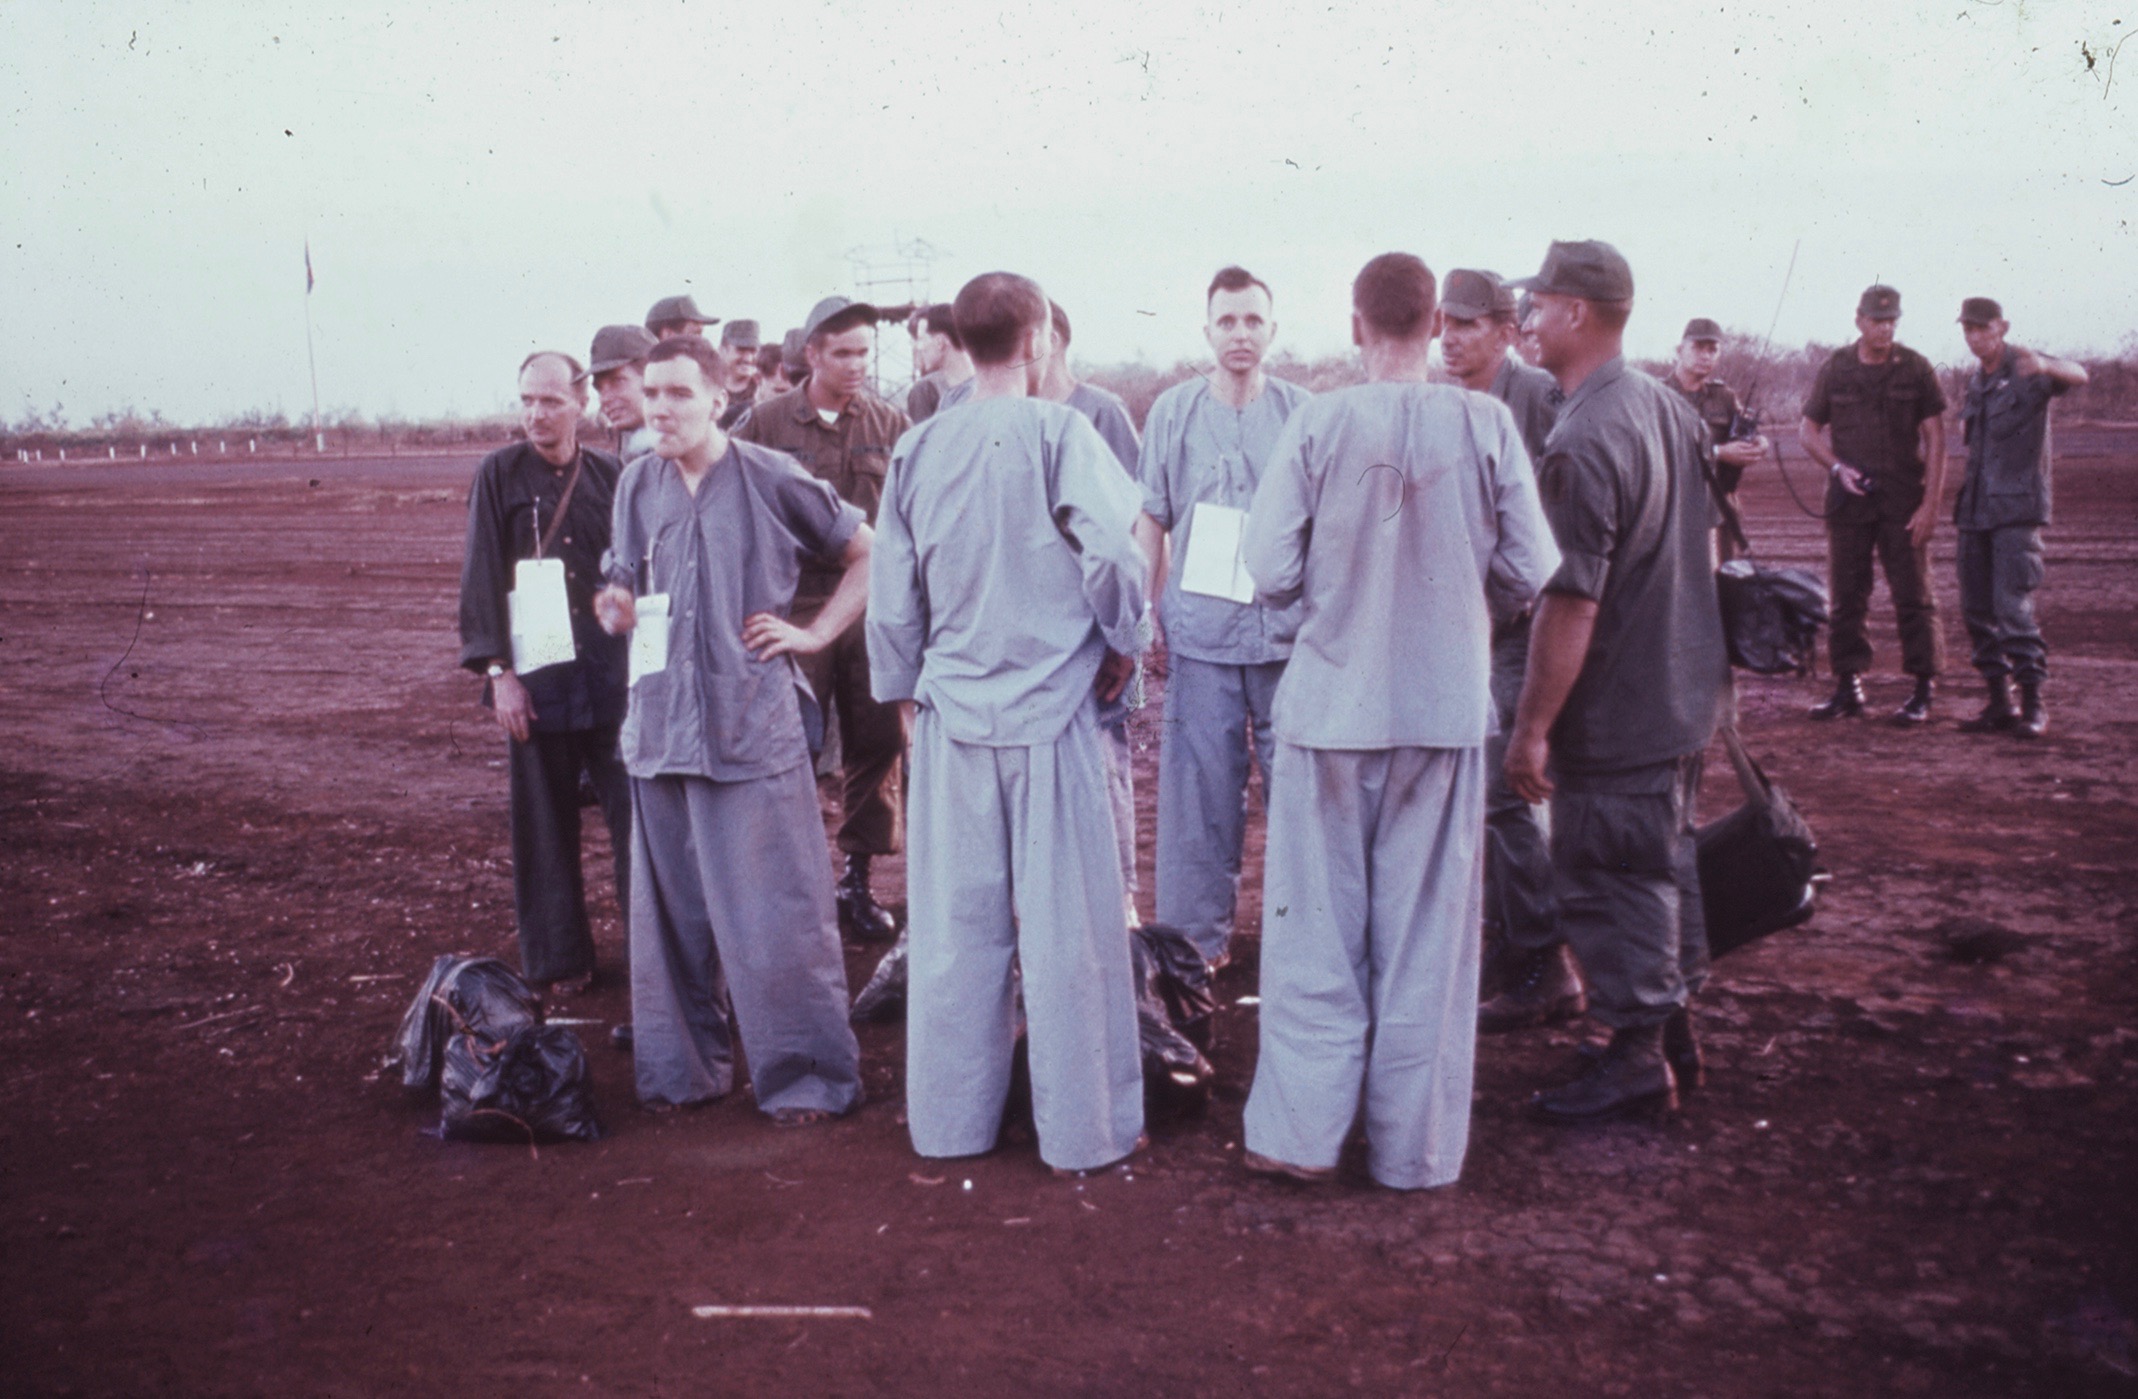 Army POWs held by the Viet Cong were driven by truck to the South Vietnamese town of Loc Ninh, near the Cambodian border, where they were released and are now being briefed by a U.S. Army officer. A helicopter took them to Saigon’s Tan Son Nhut Air Base. A C-9 Nightingale medical transport plane flew them to Clark Air Base. (U.S. Air Force)